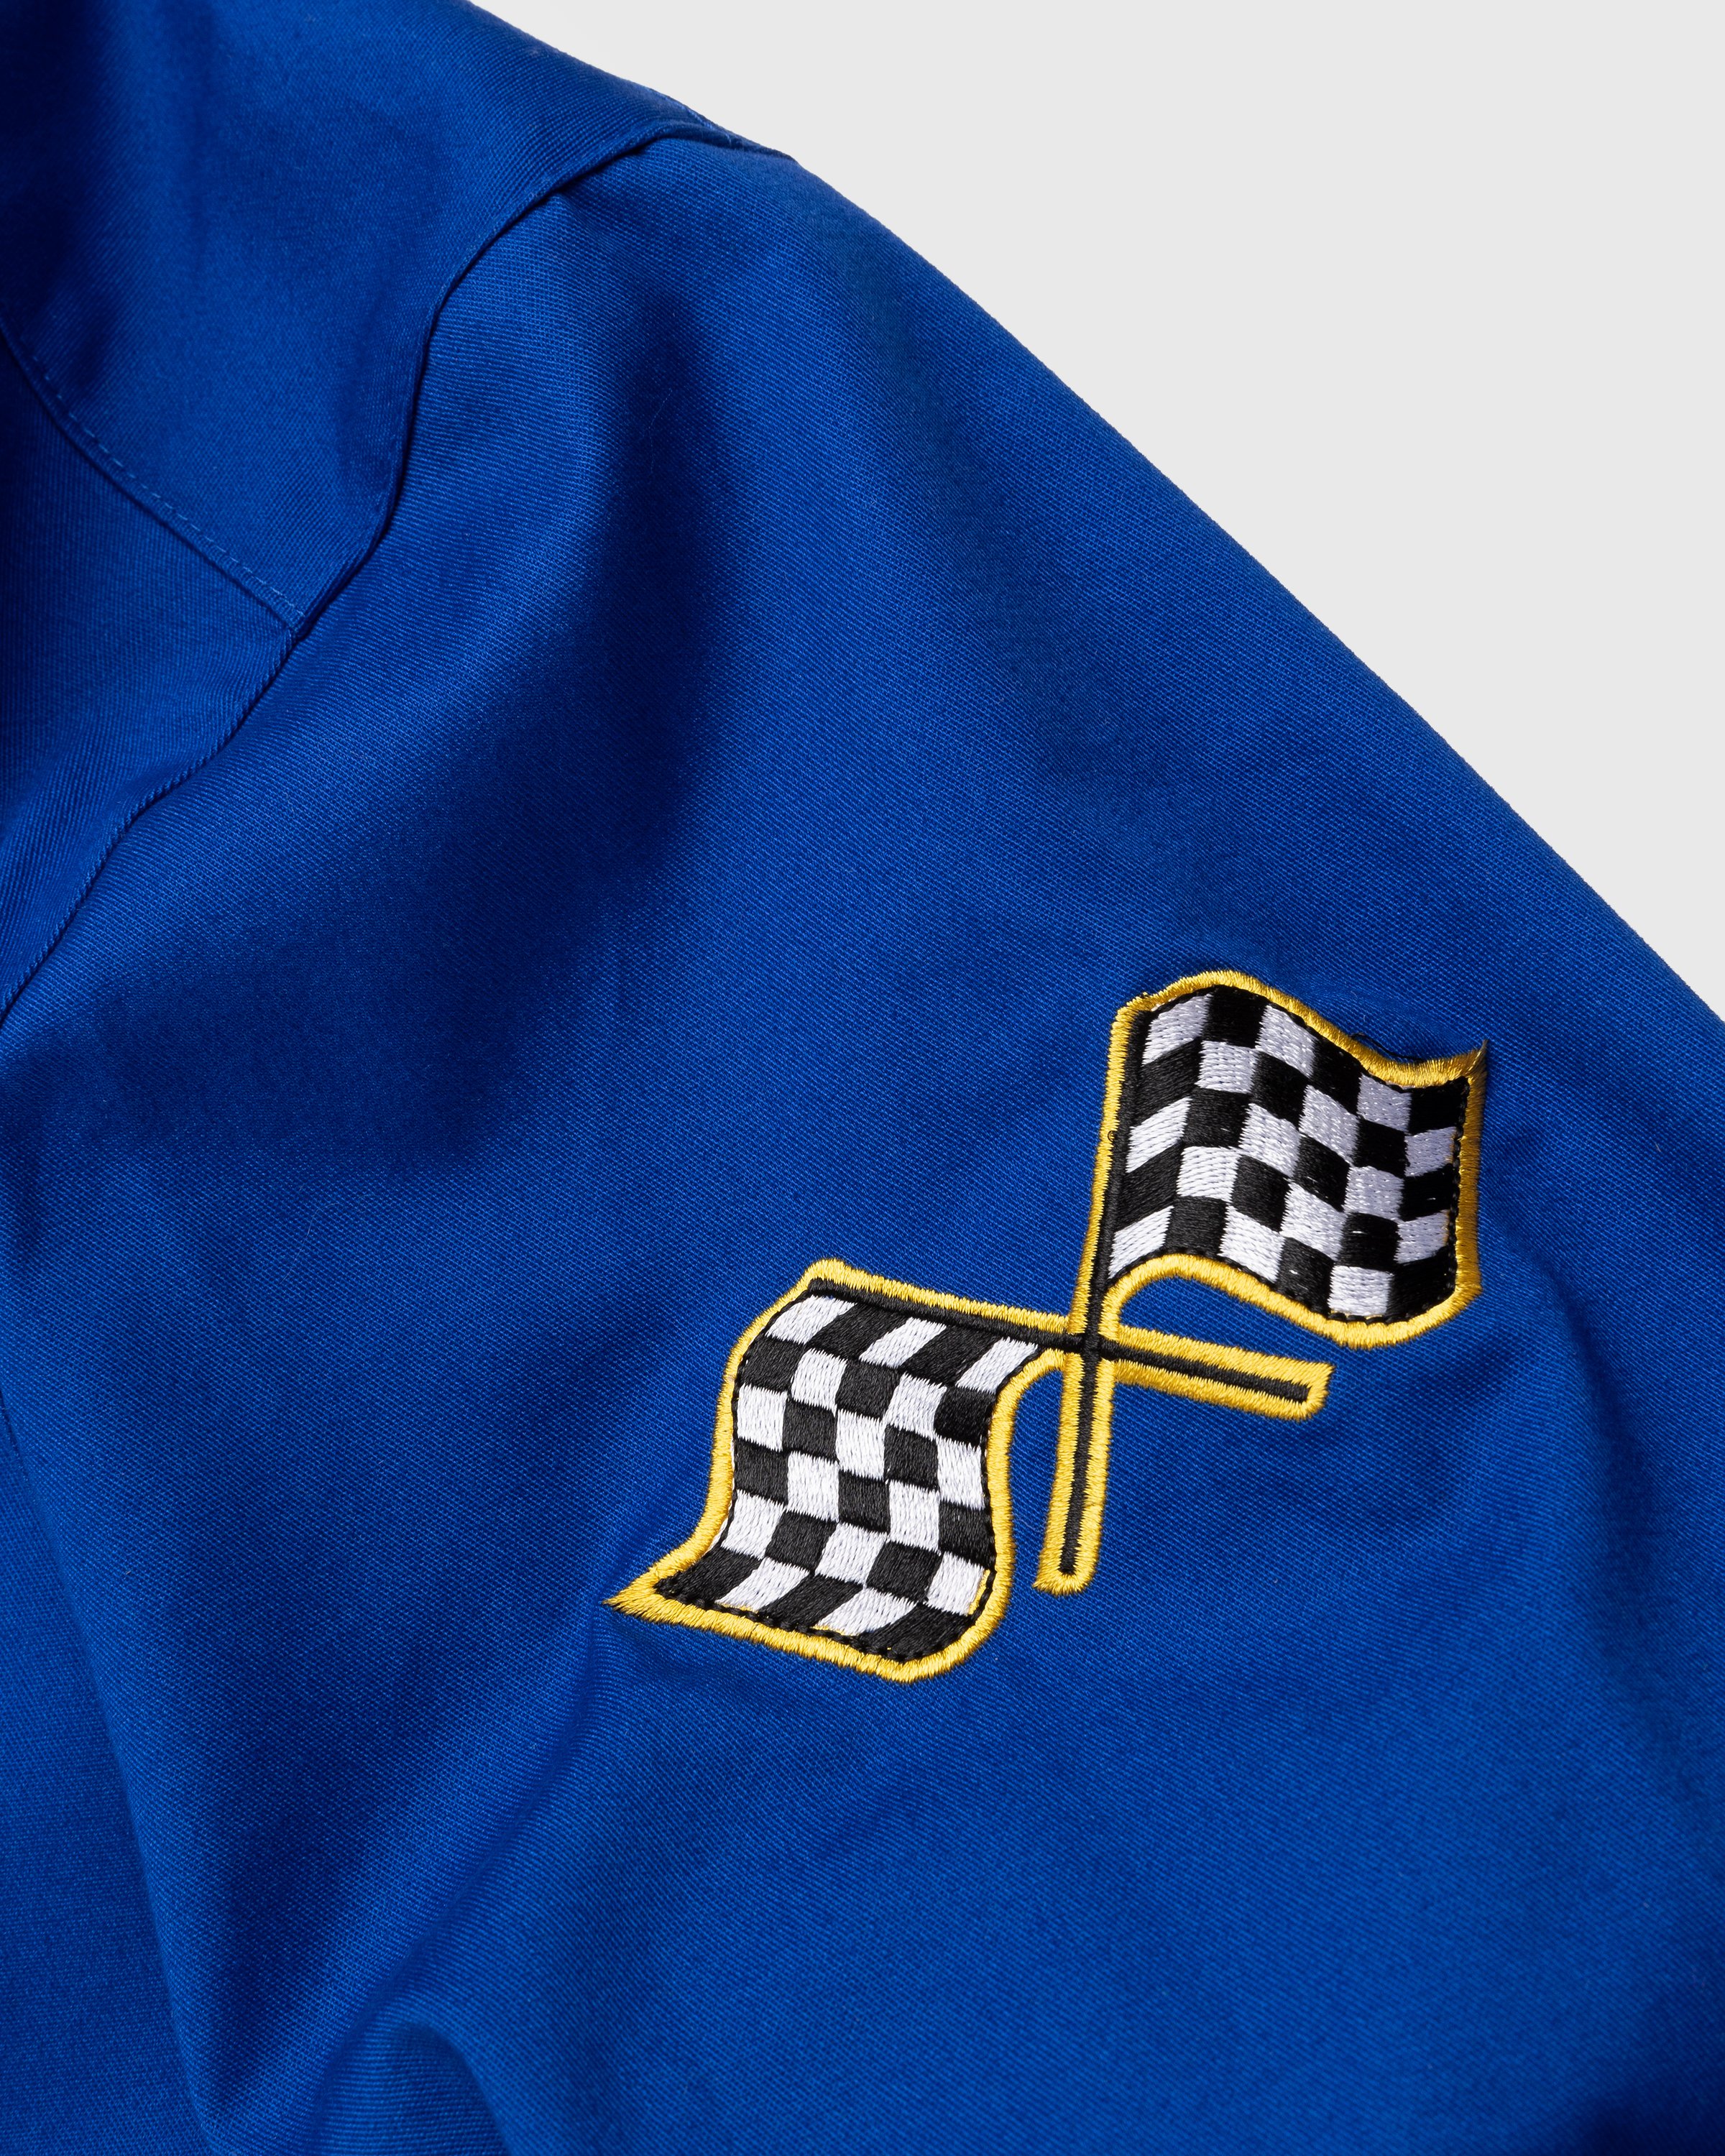 Adidas - Sean Wotherspoon x Hot Wheels Race Jacket Blue - Clothing - Blue - Image 9